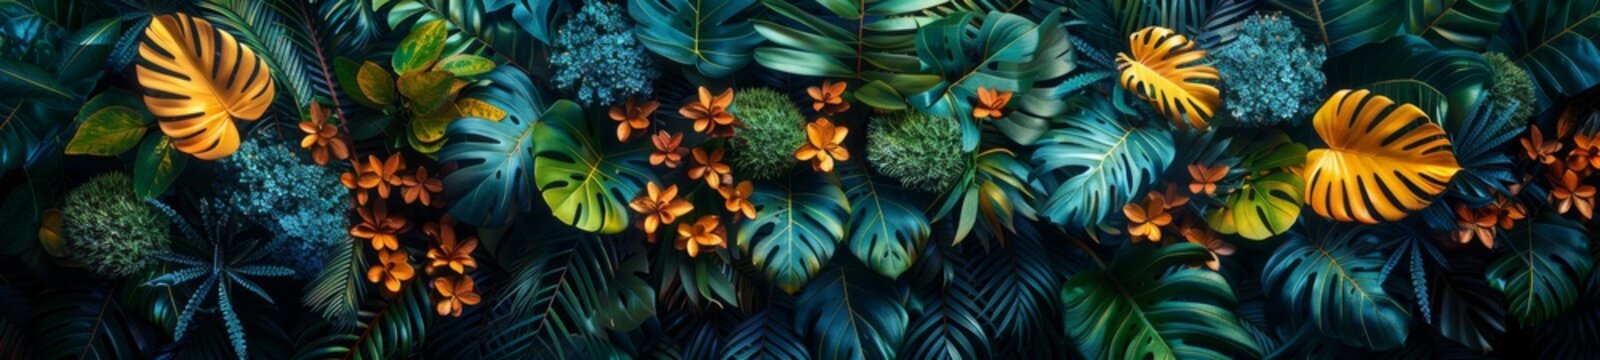 The lush green foliage serves as a perfect backdrop for the vibrant tropical flowers, their hues standing out like vivid splashes of color on a verdant canvas, highlighting the beauty of nature's.